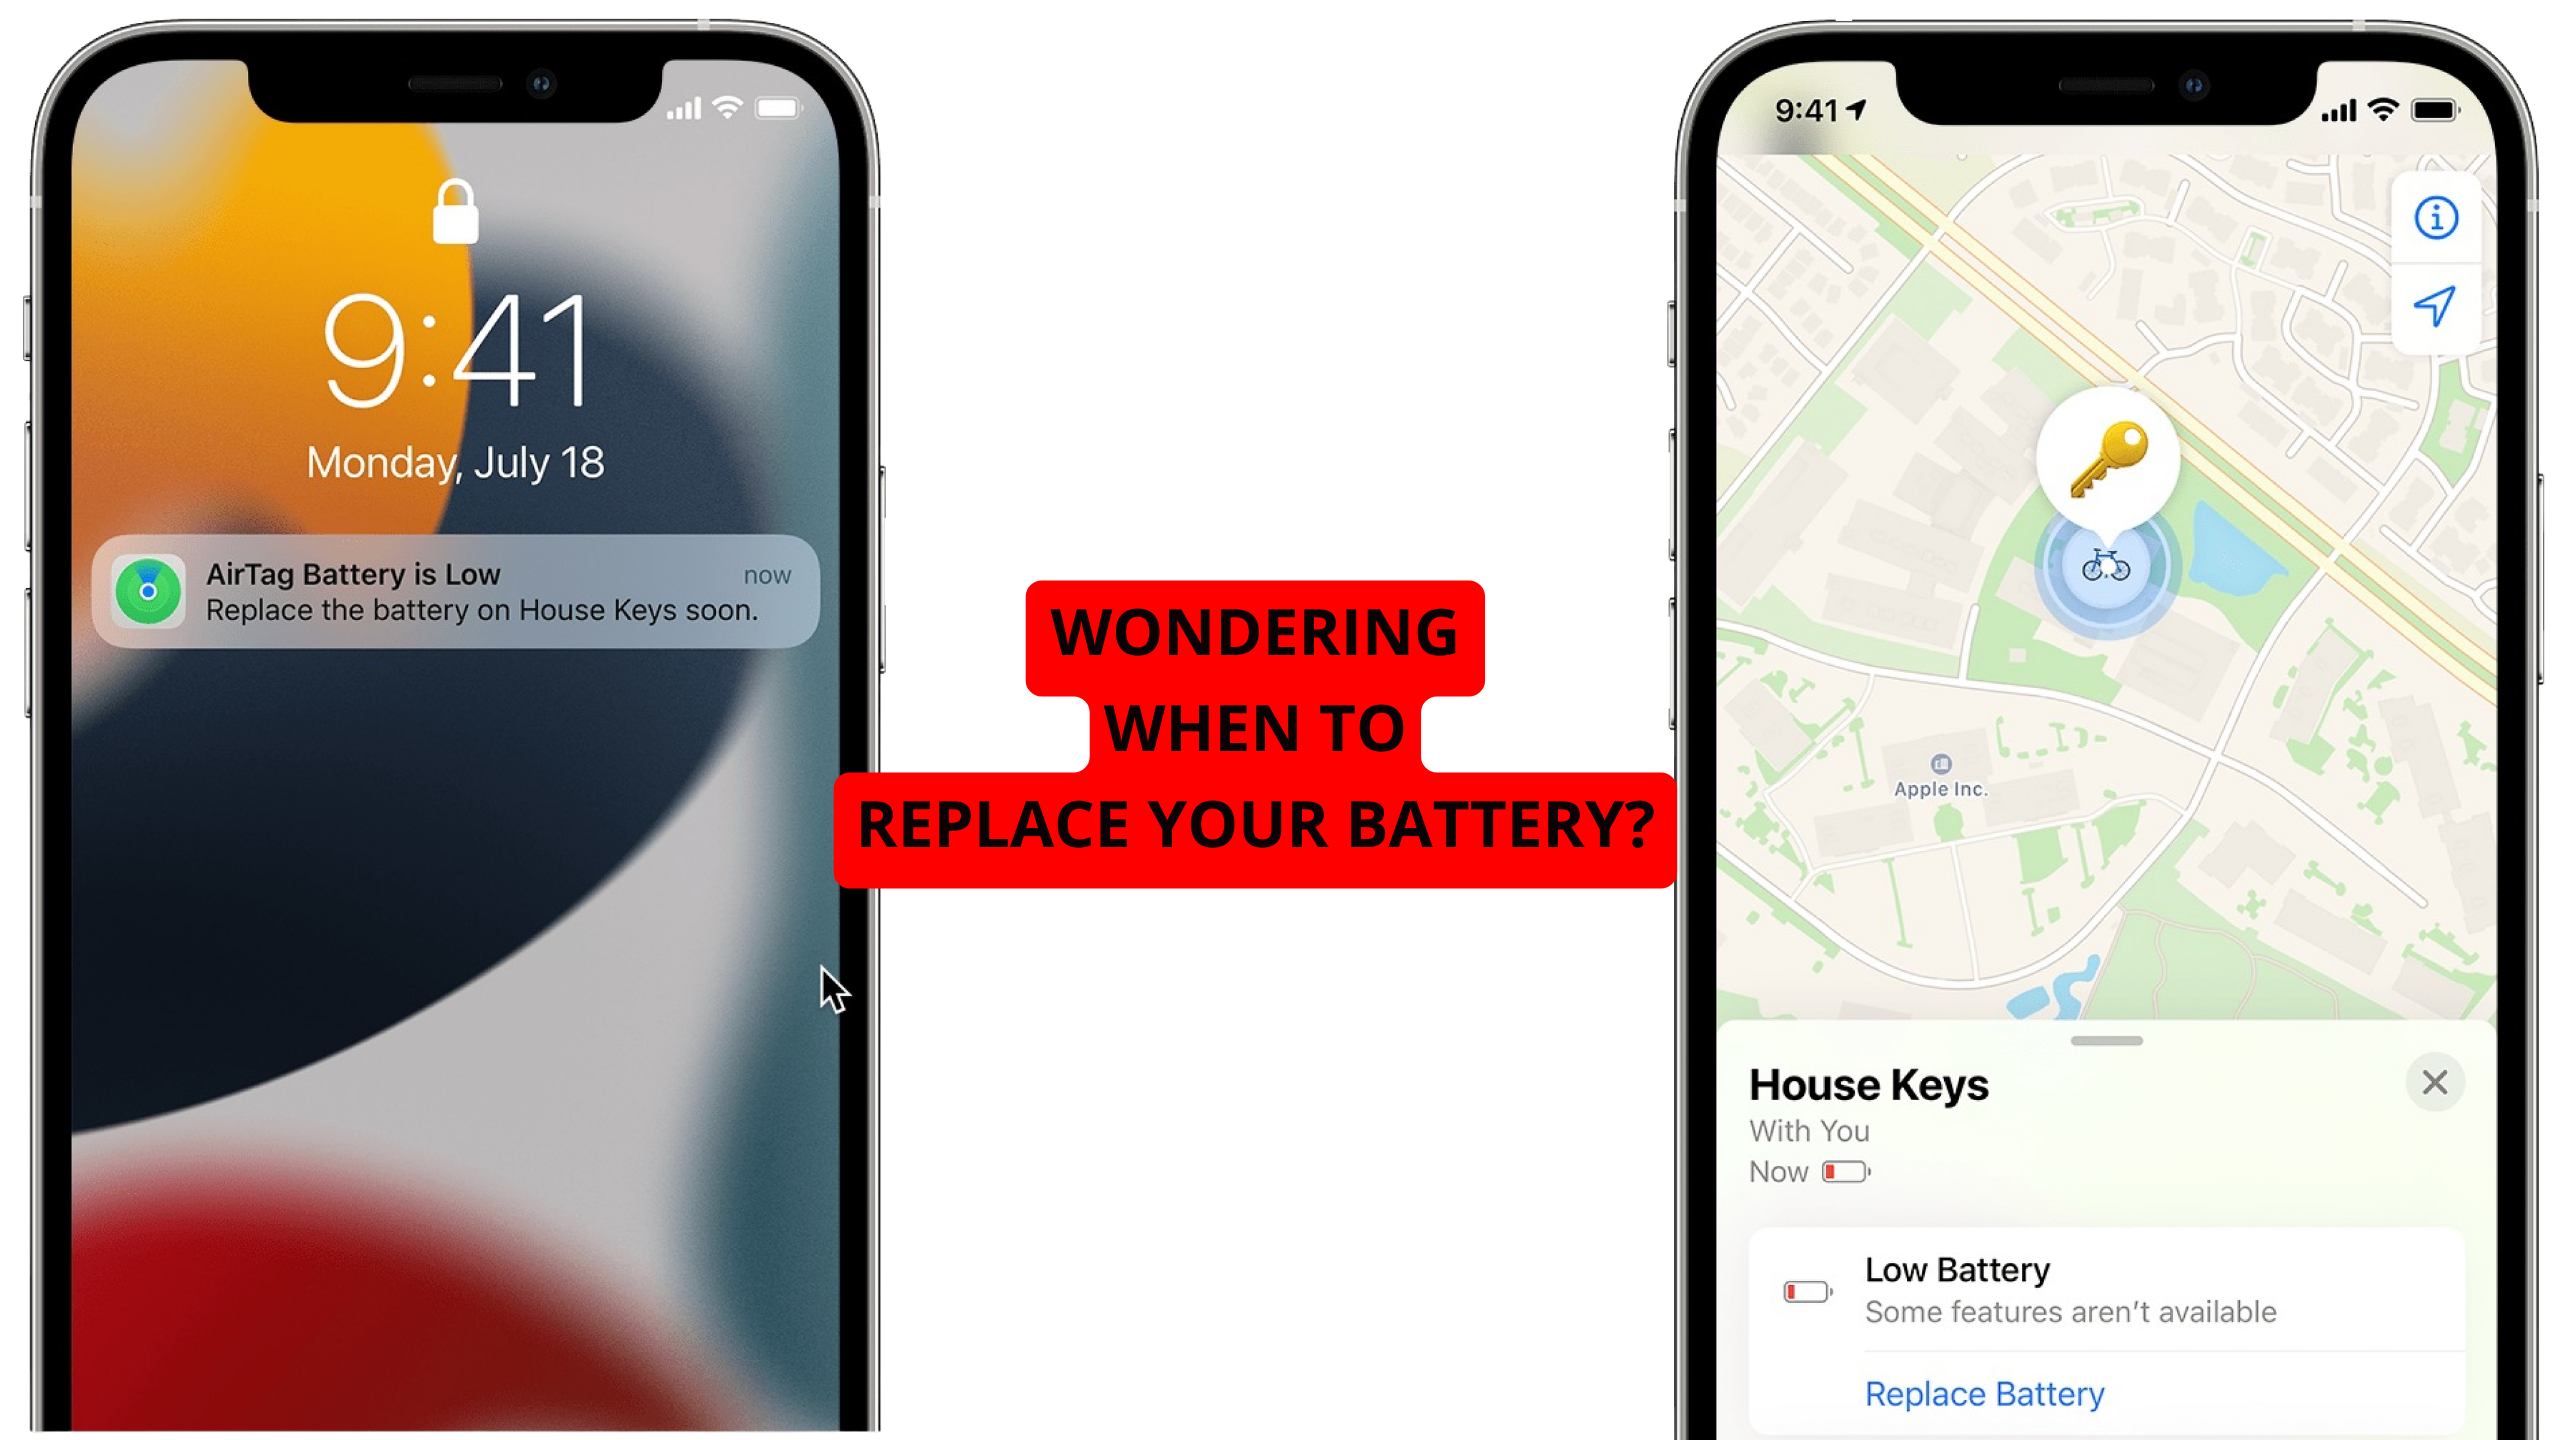 Wondering When to Replace Your Battery?